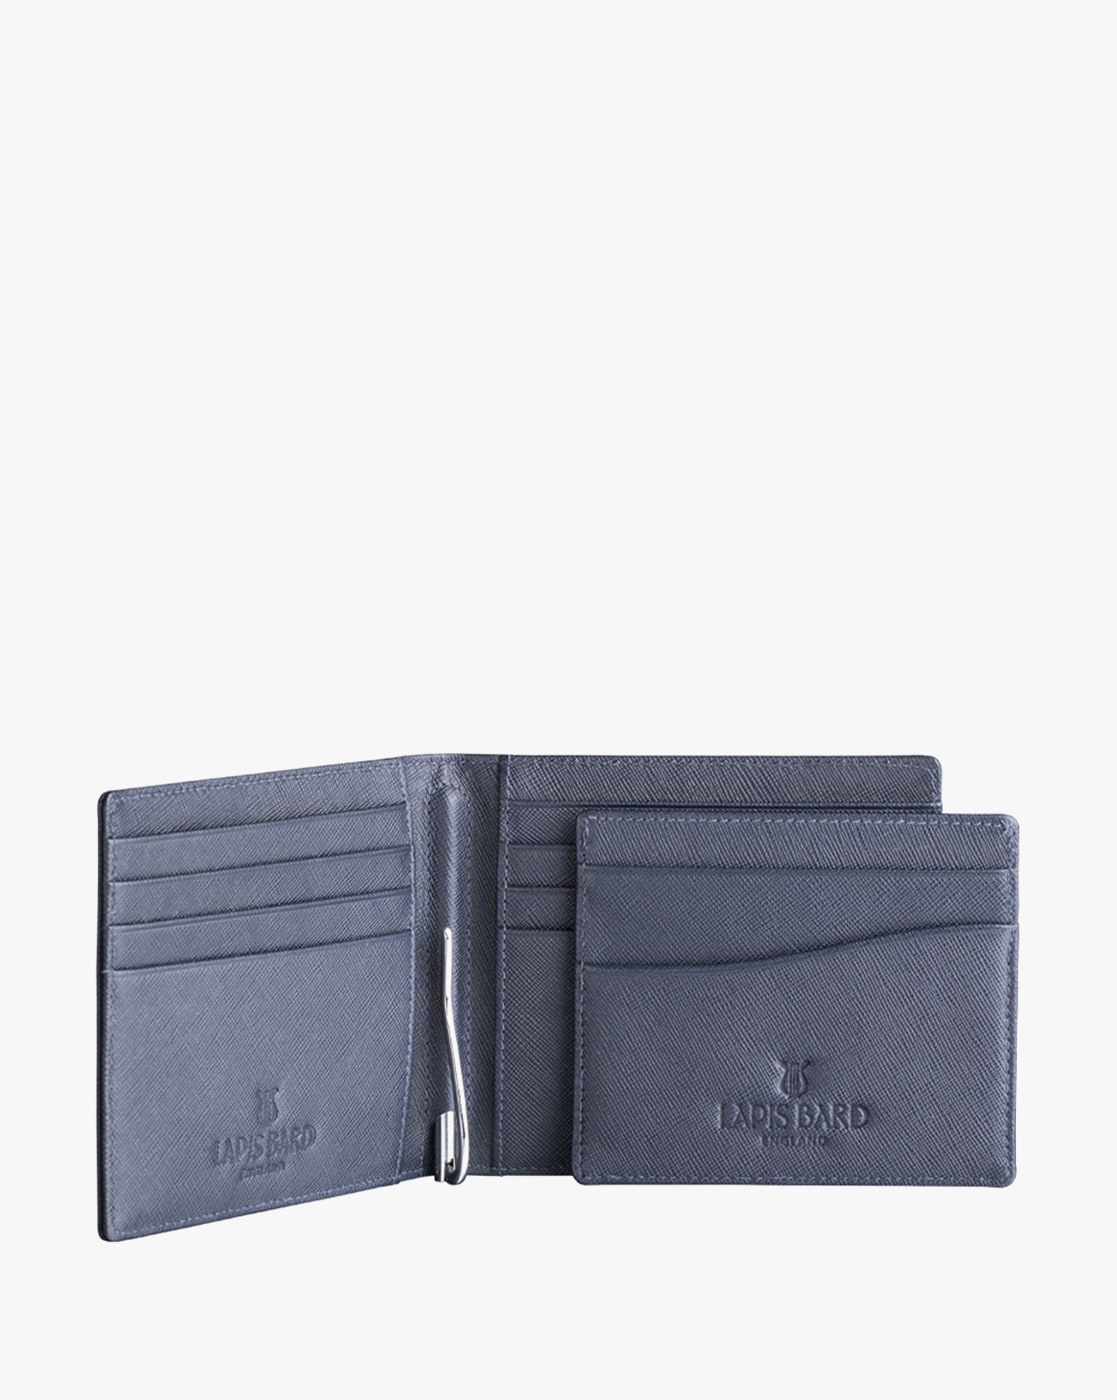 Lapis Bard Stanford Credit Card Holder - Blue (Blue) At NykaaMan, Products Handpicked for Men